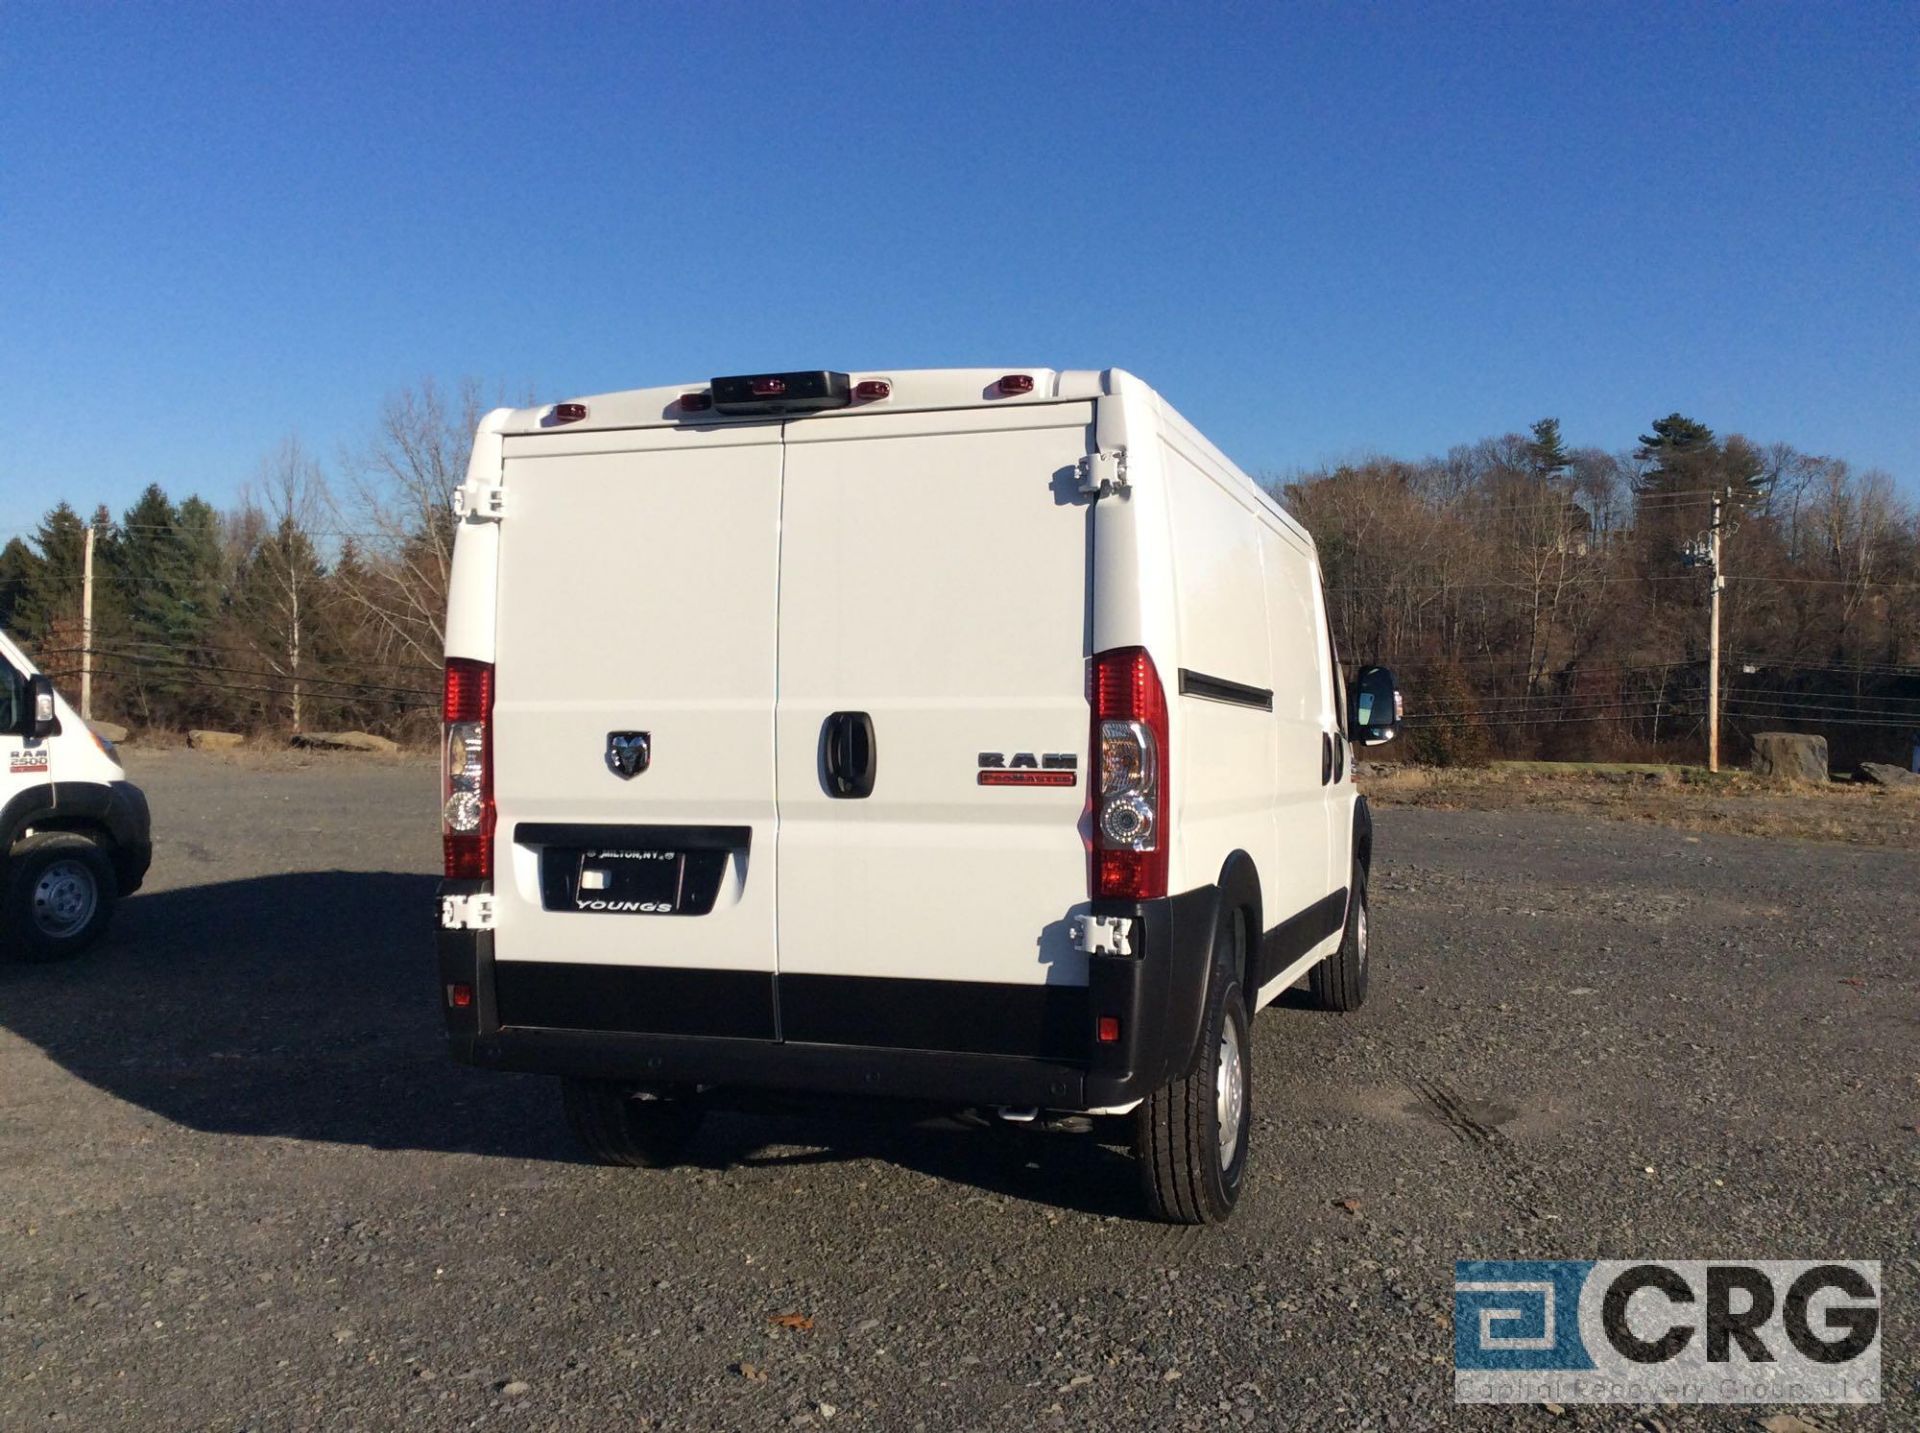 2019 Ram 1500 PROMASTER CARGO VAN 136” WB LOW ROOF, AT, 3.6 liter V-6 engine, keyless entry, power - Image 3 of 13